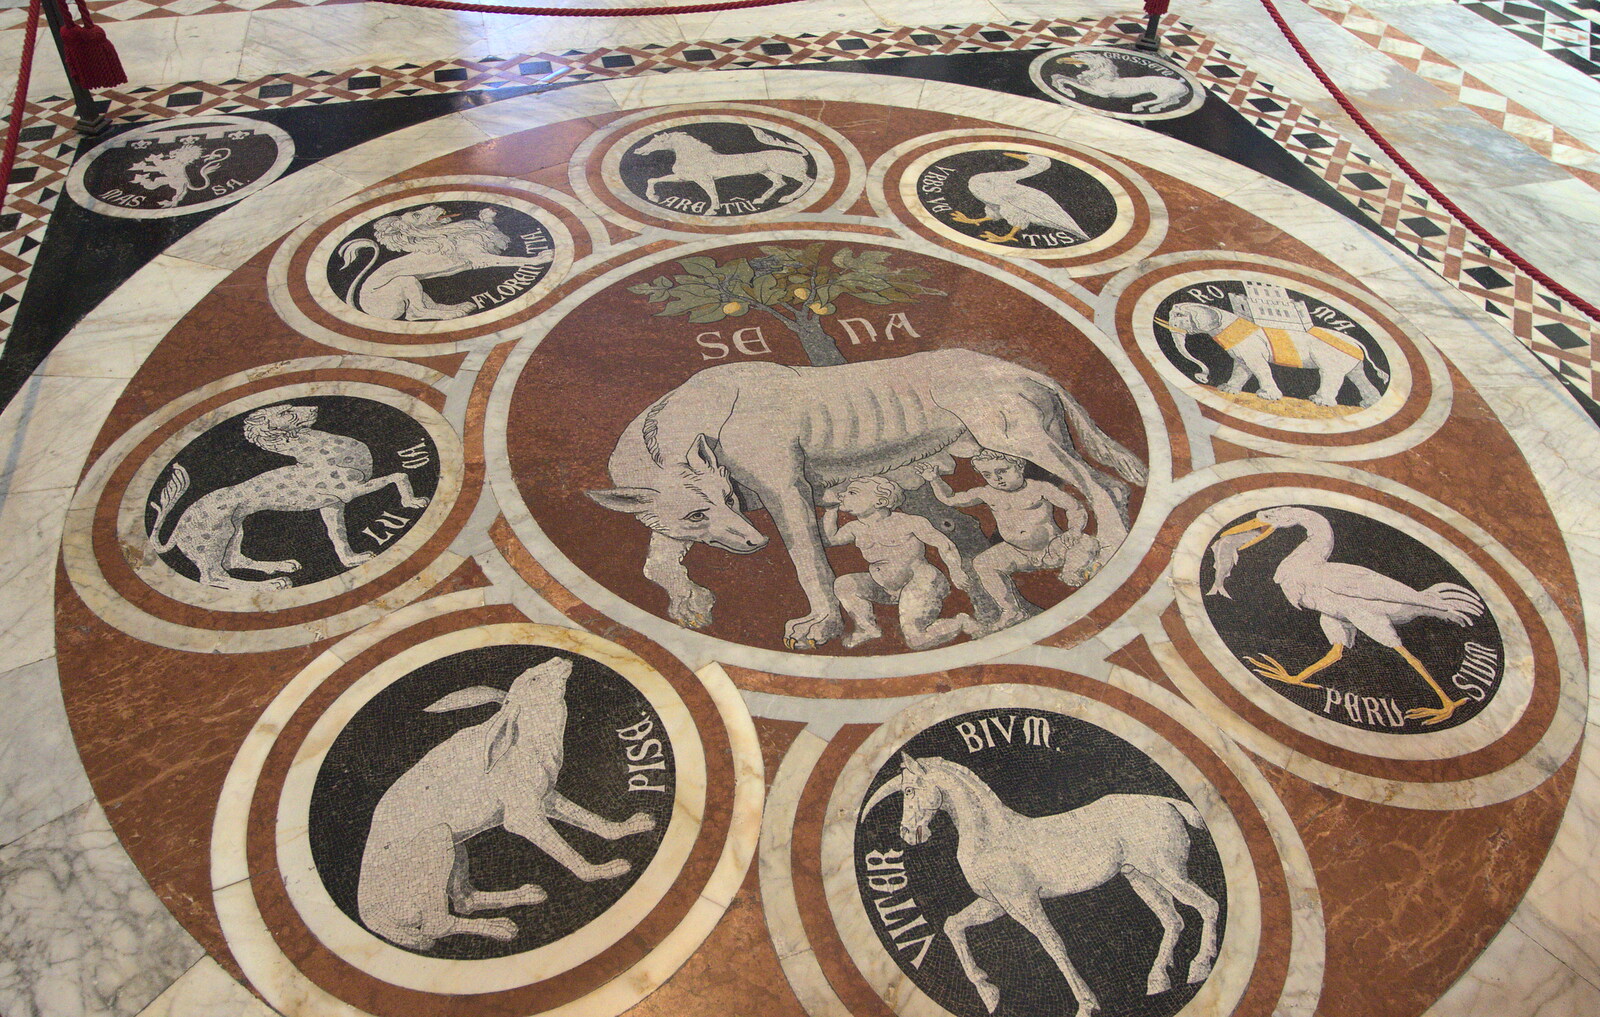 A Tuscan Winery and a Trip to Siena, Tuscany, Italy - 10th June 2013: Cool Romanesque moasiac